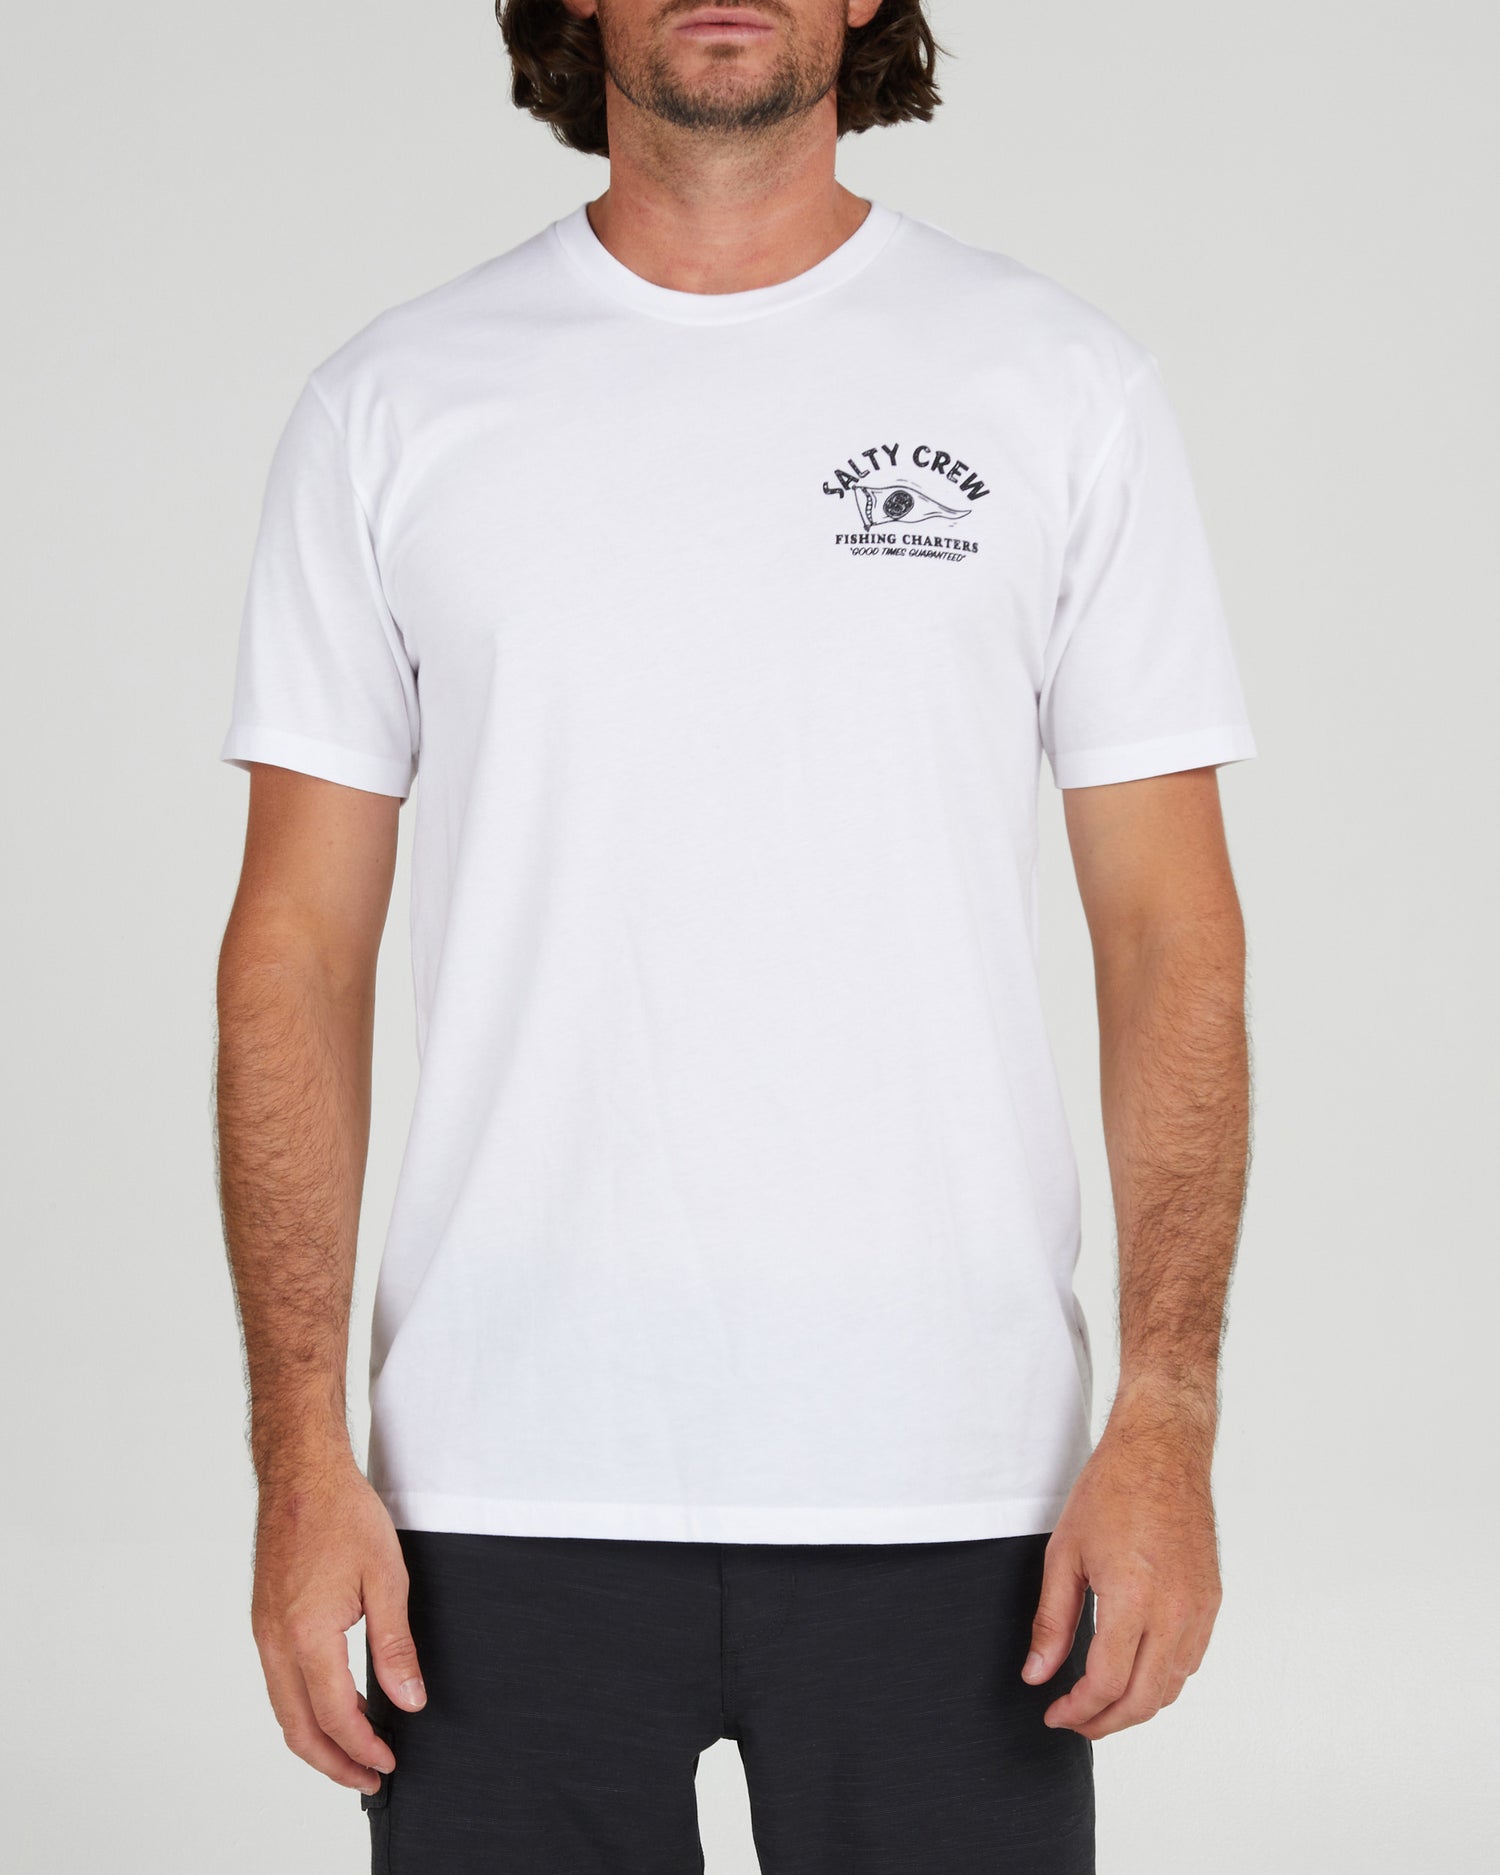 front view of Fishing Charters White S/S Premium Tee